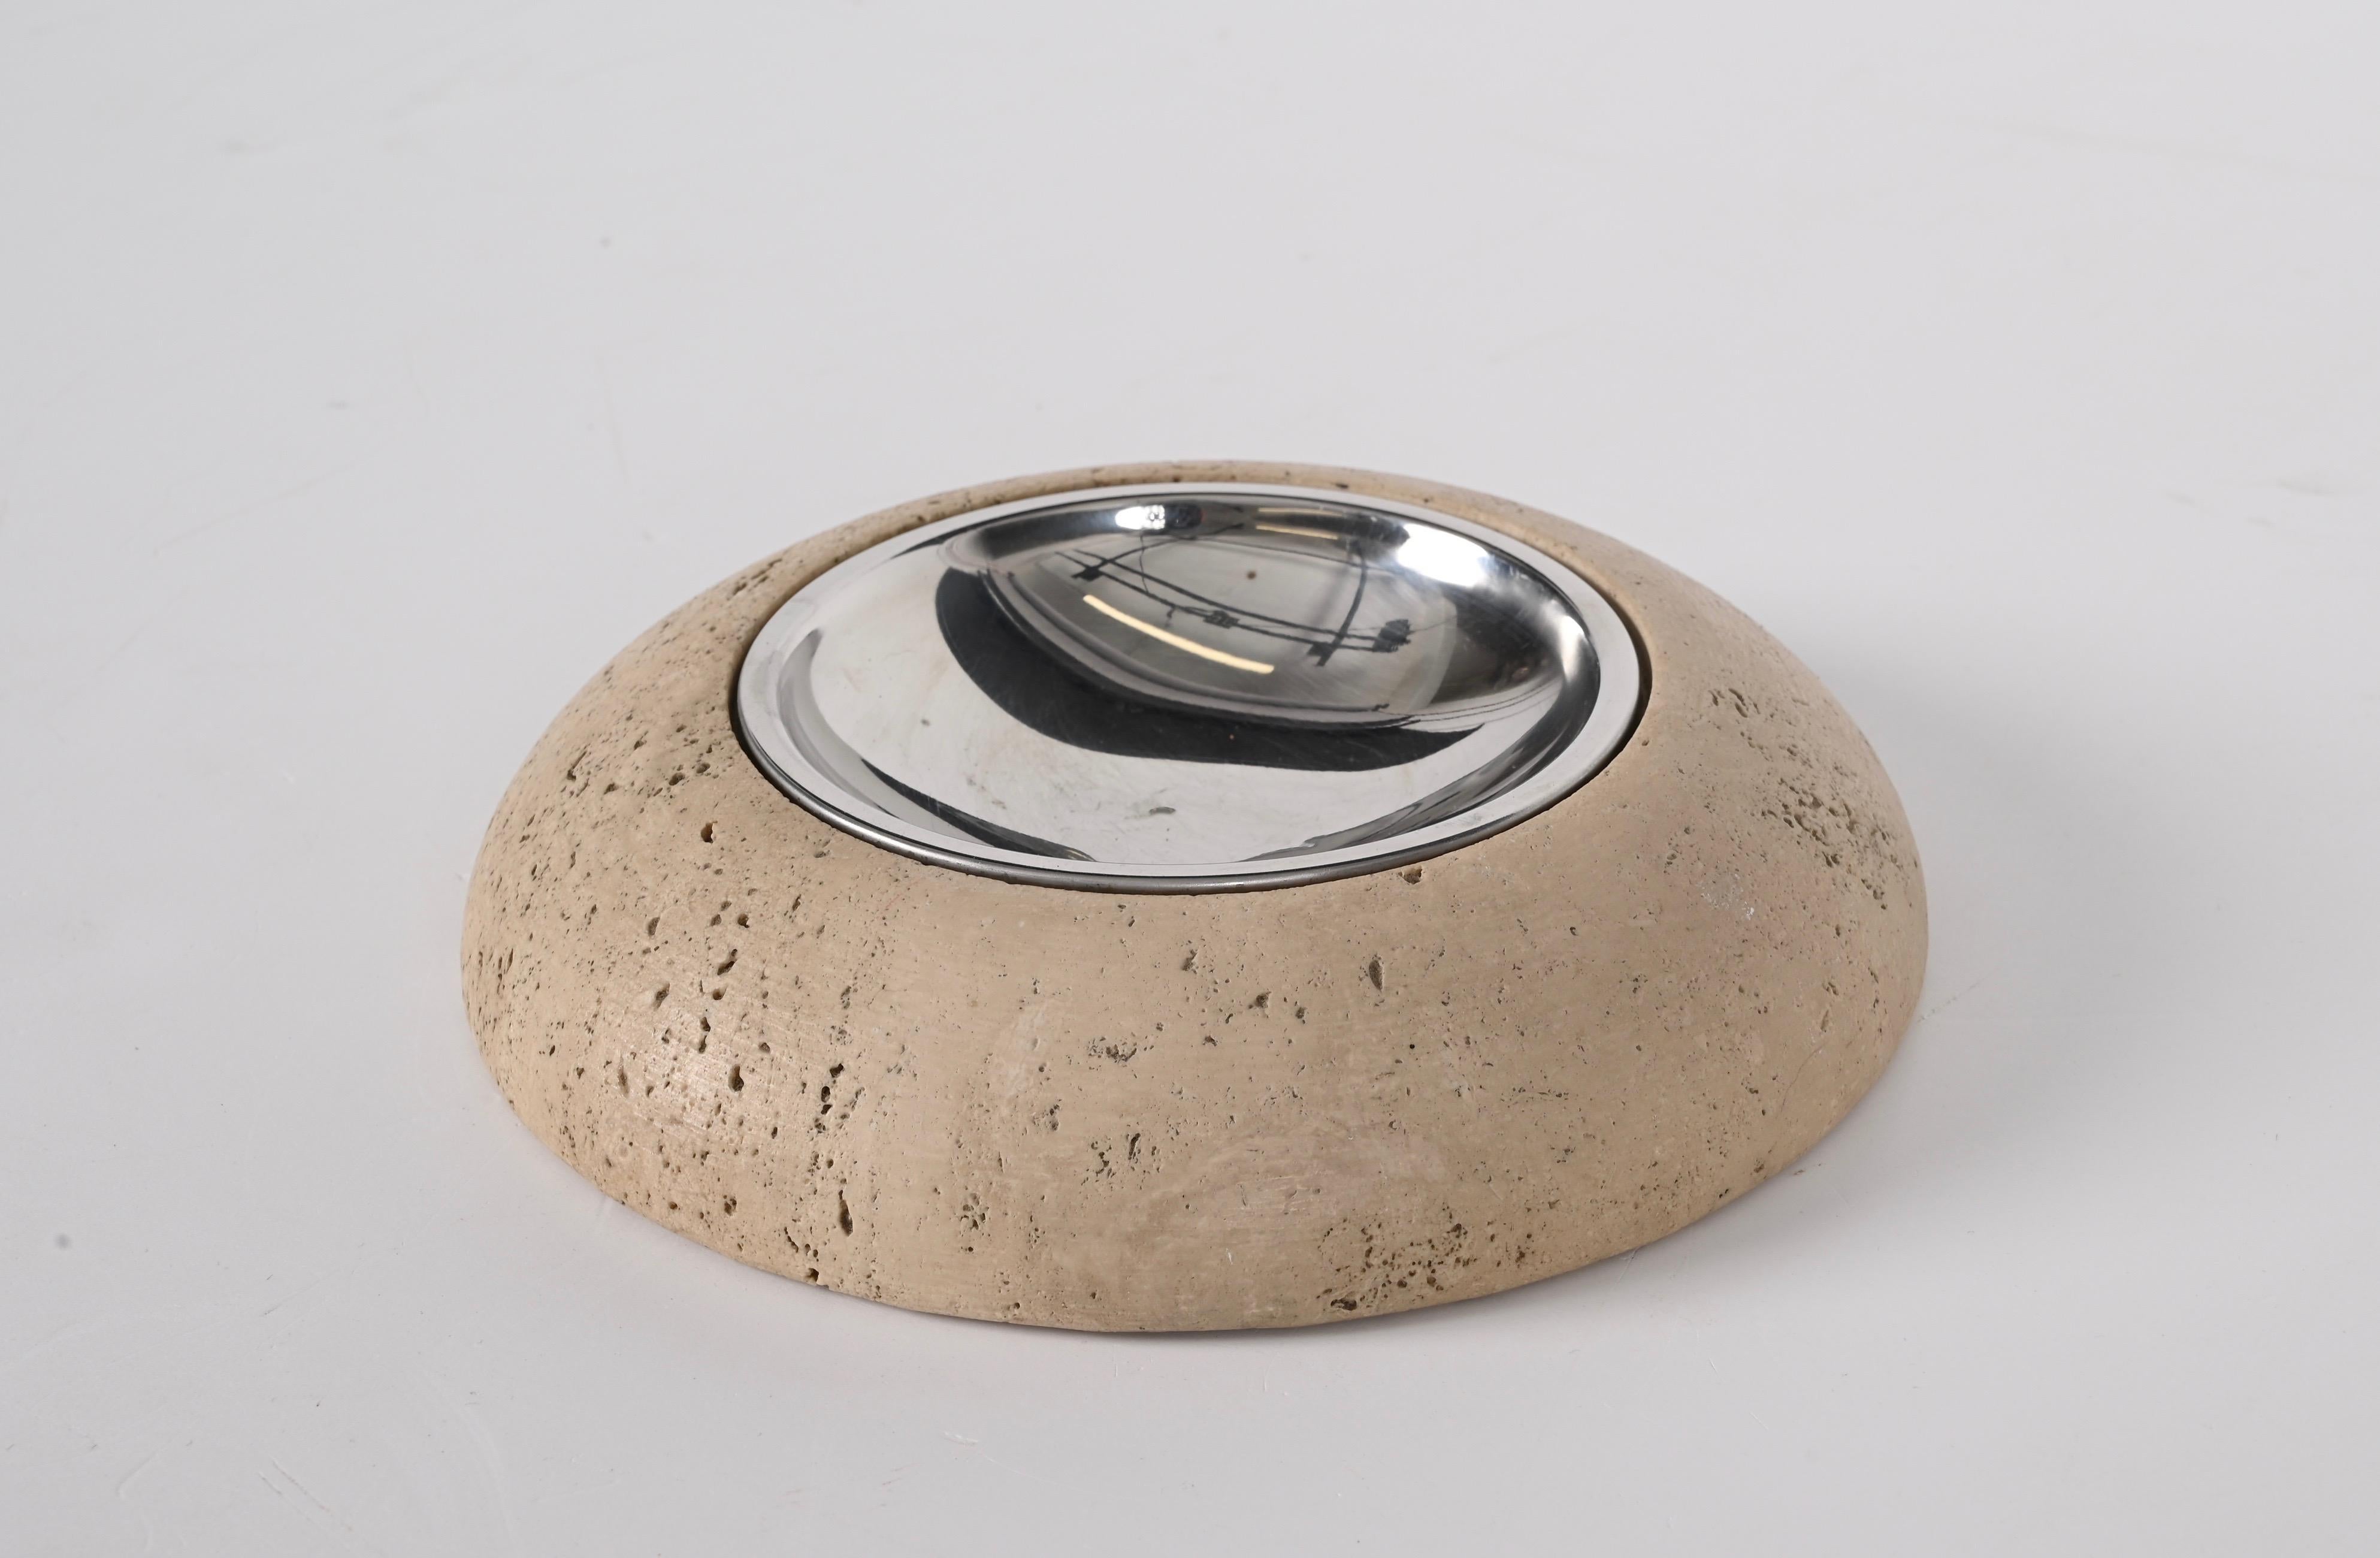 Mid-Century Modern Midcentury Round Ashtray White Travertine Marble and Steel, Mannelli Italy 1970s For Sale